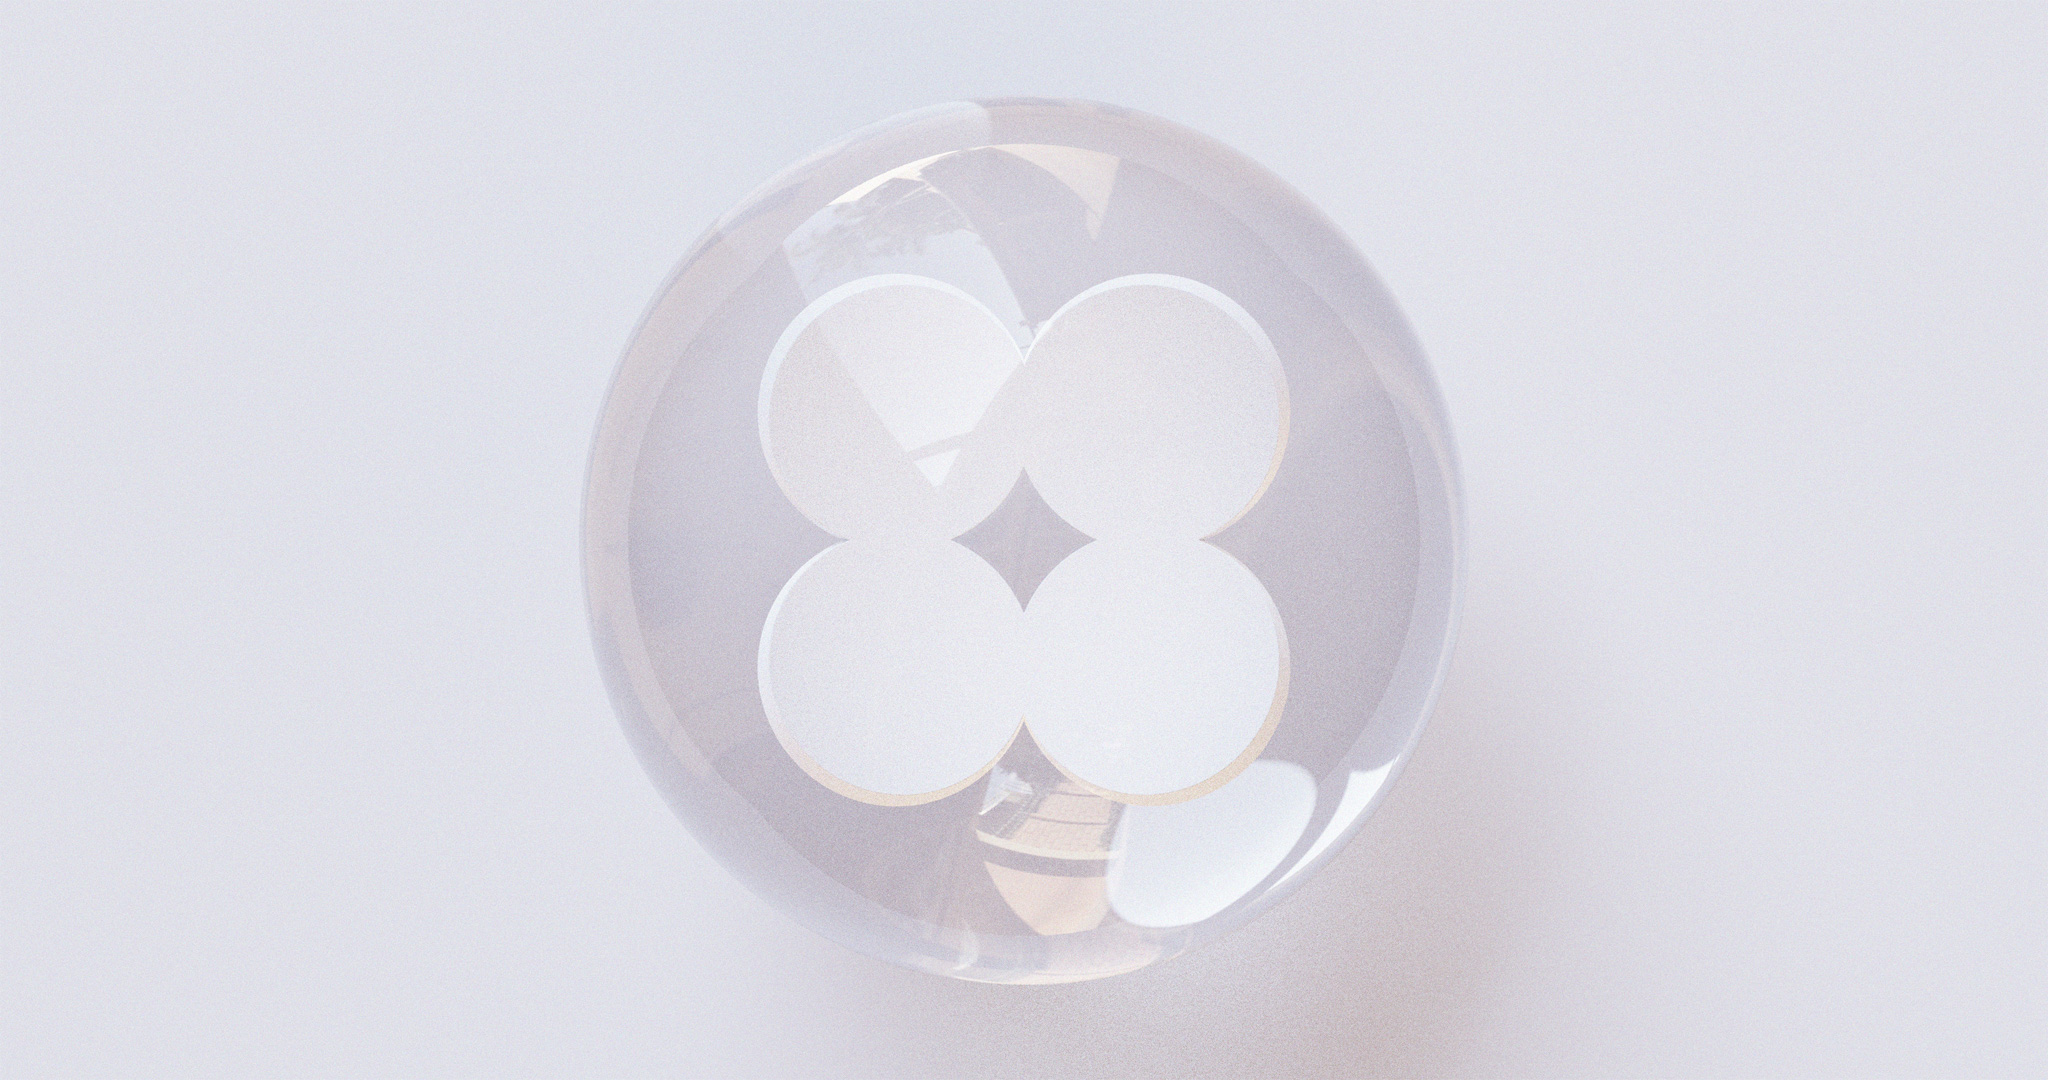 3D render of the ‘M4 icon’, in a white, mineral-like material, enclosed in a transparent glass orb.